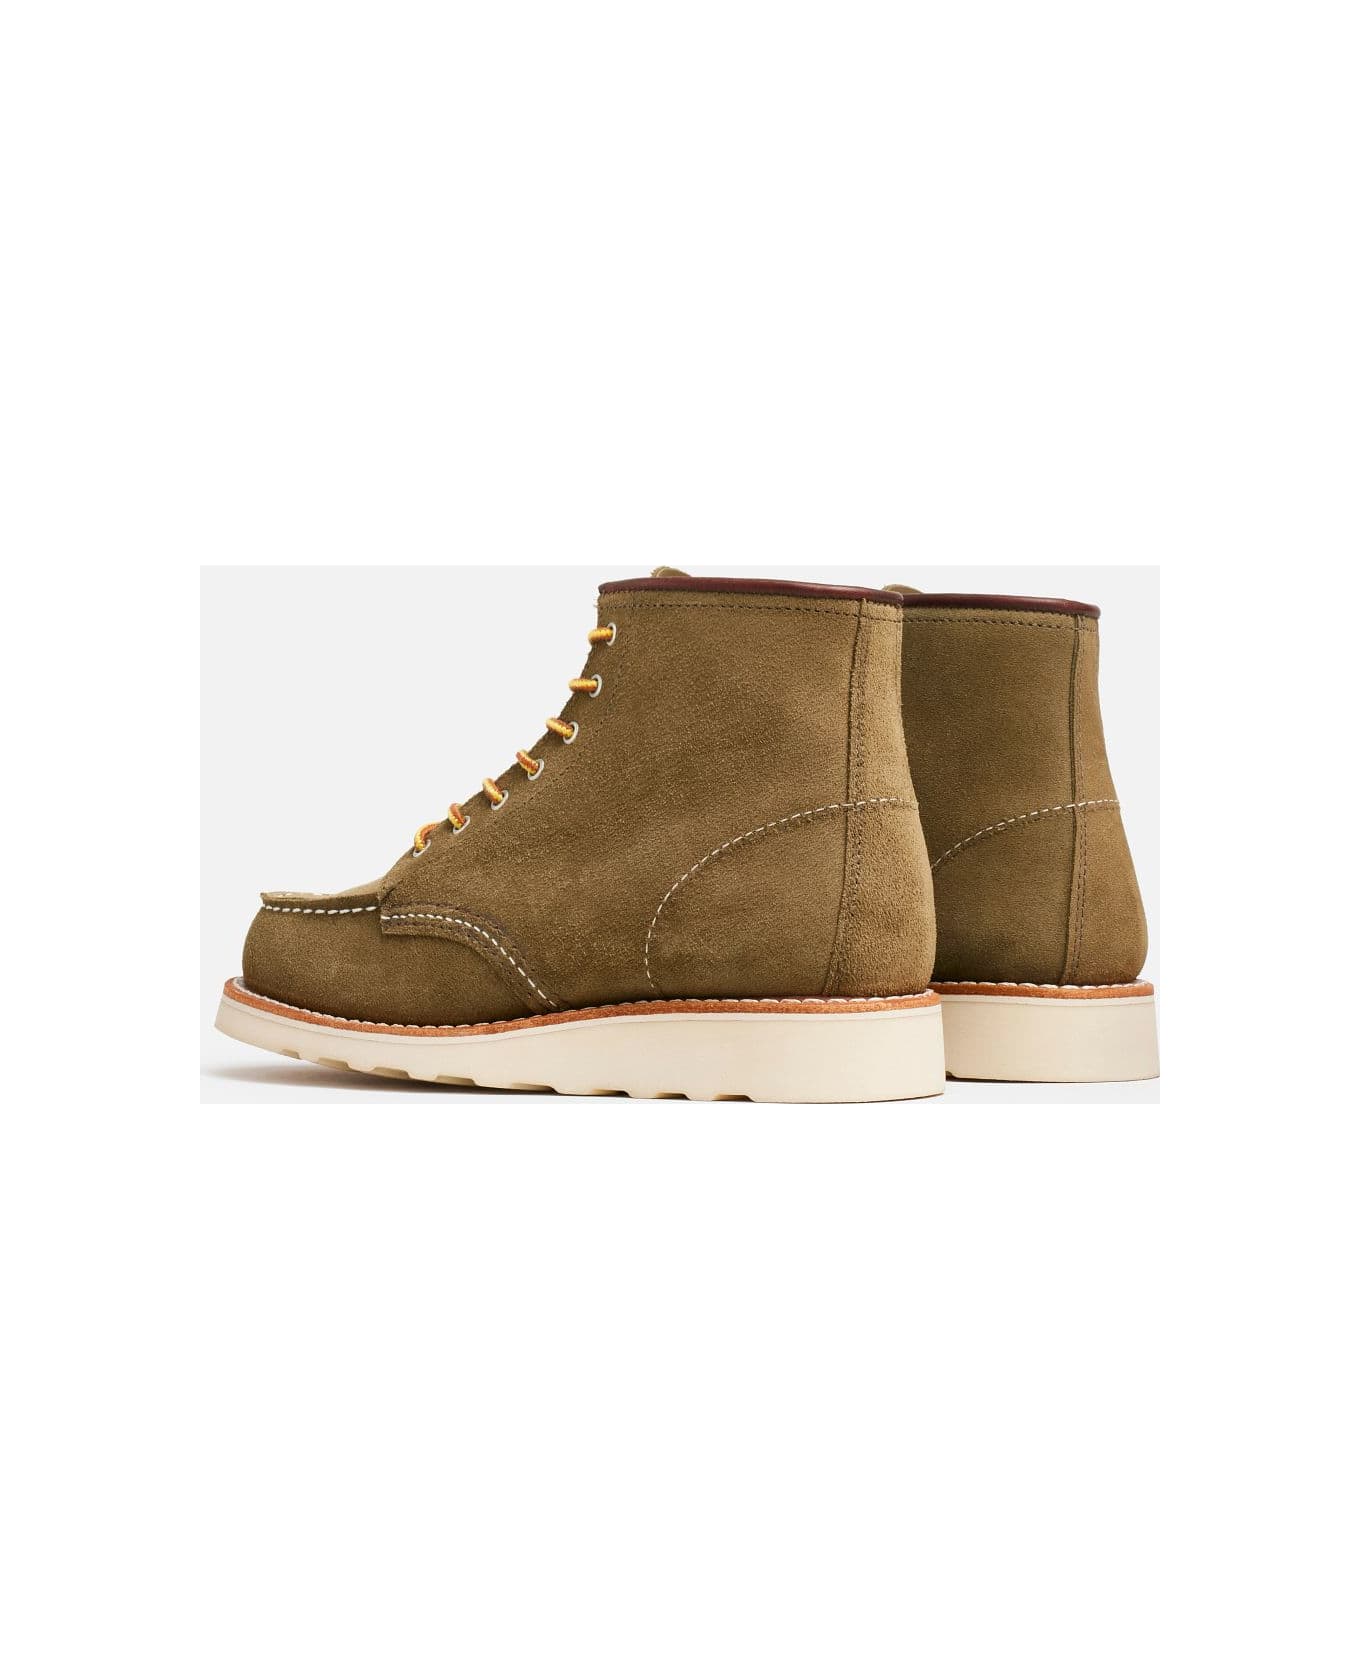 Red Wing 6 Inch Moc - Olive Mohave